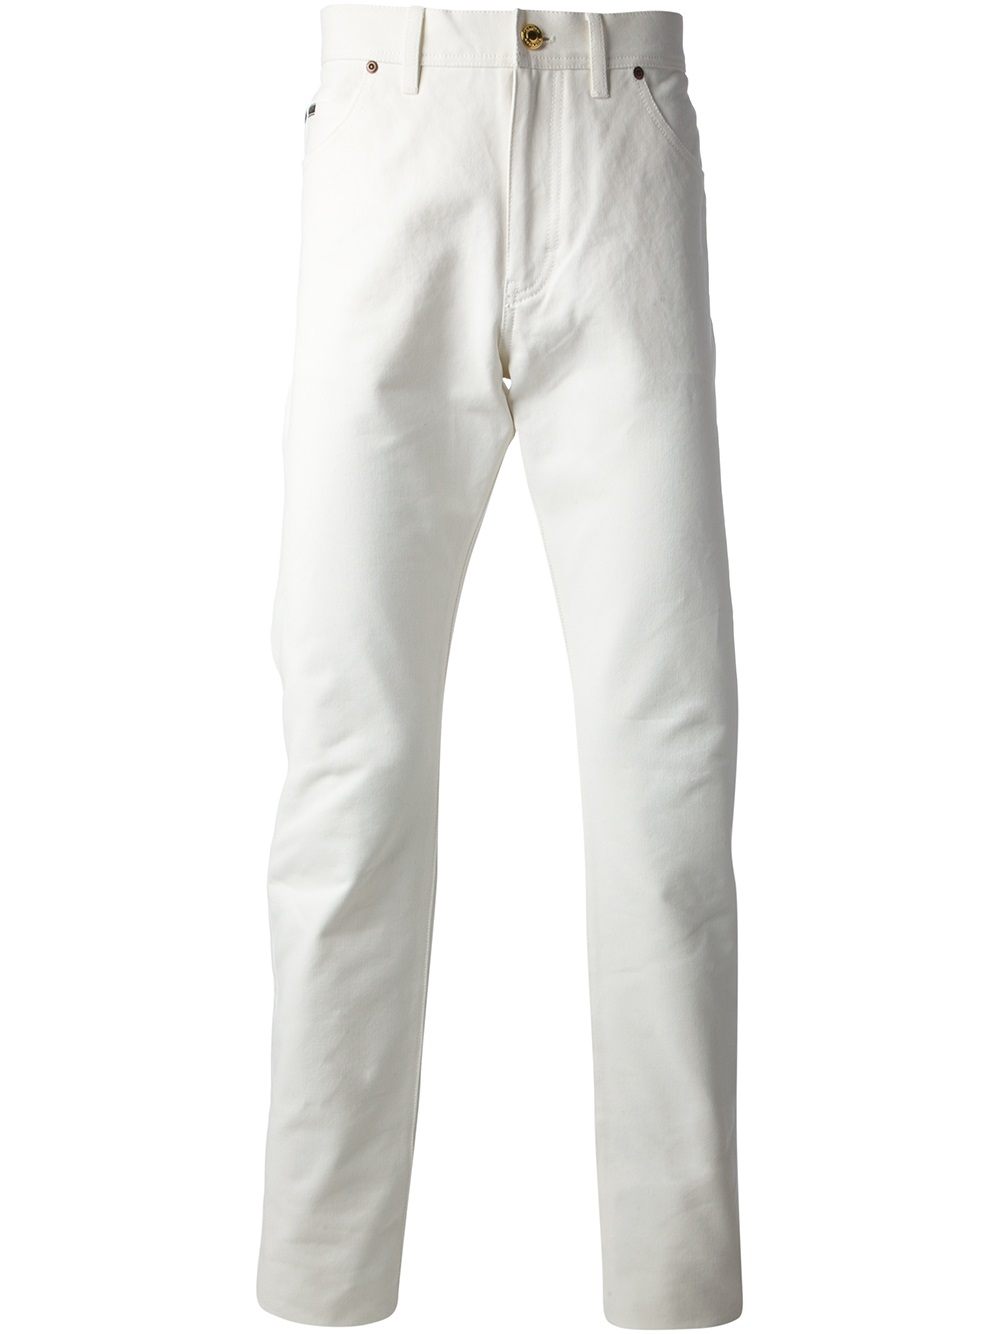 Tom Ford Slim Fit Jeans in White for Men - Lyst